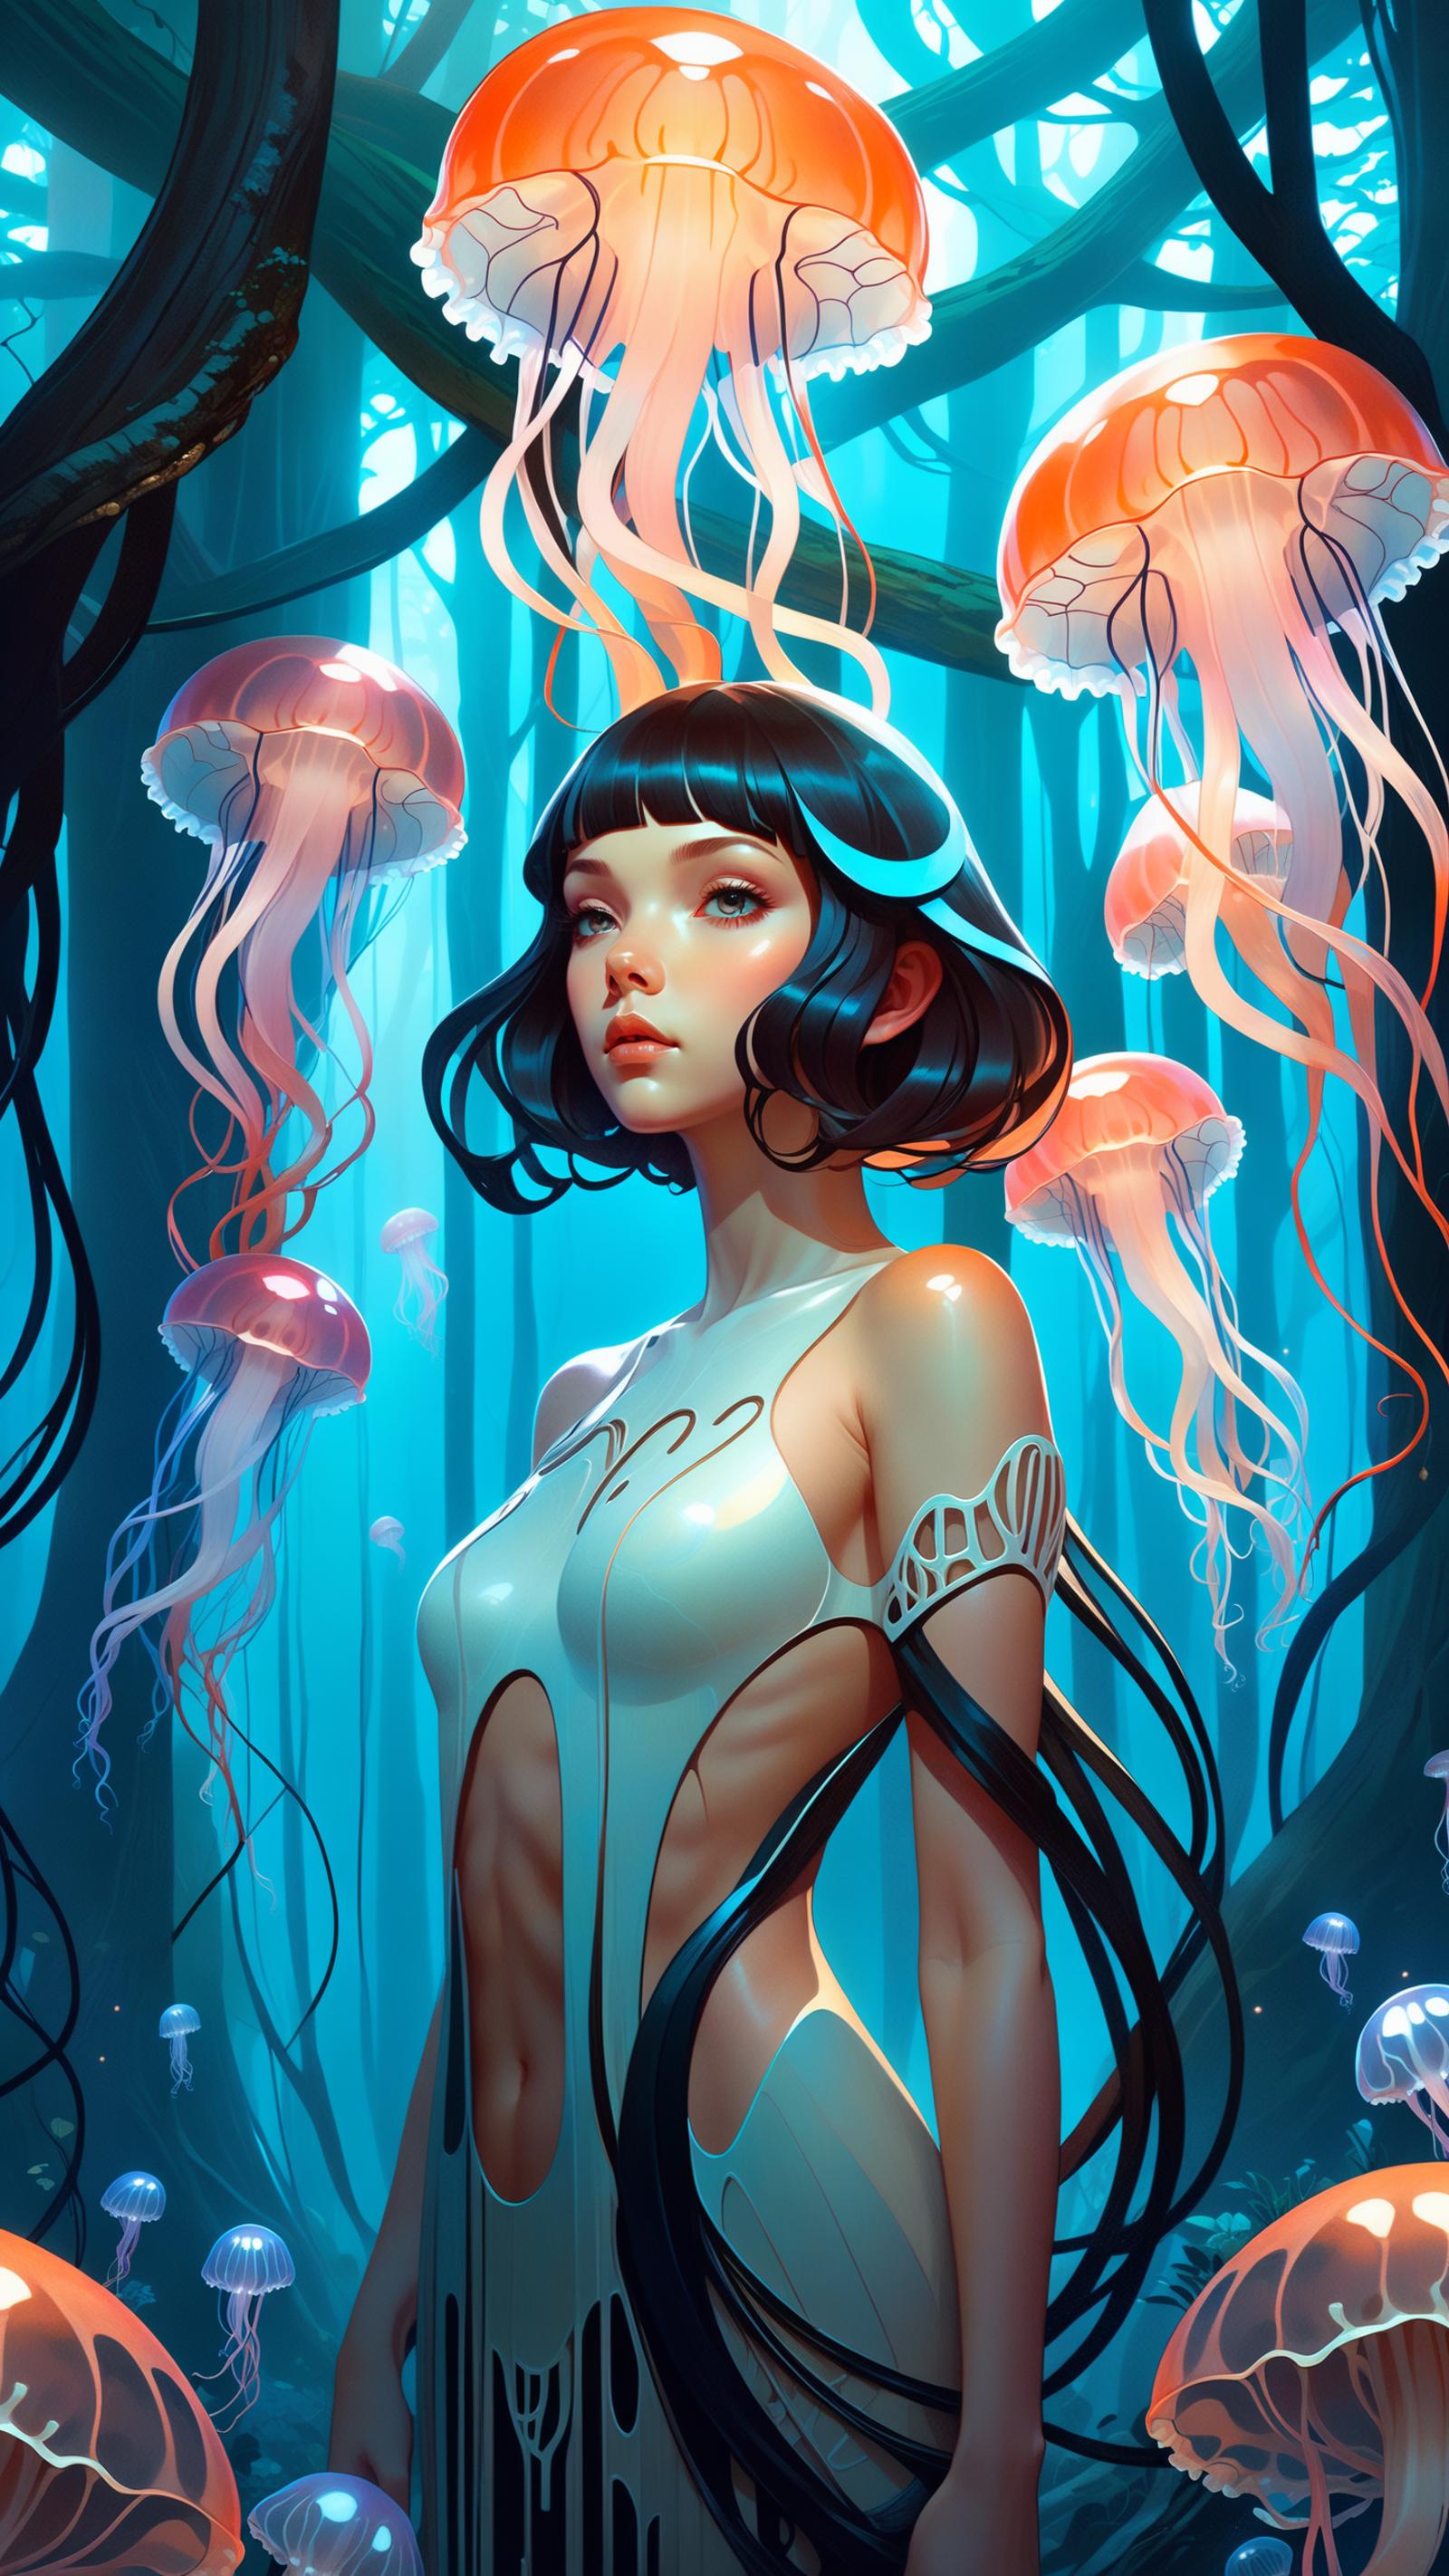 A woman in a white dress stands in a forest surrounded by jellyfish.